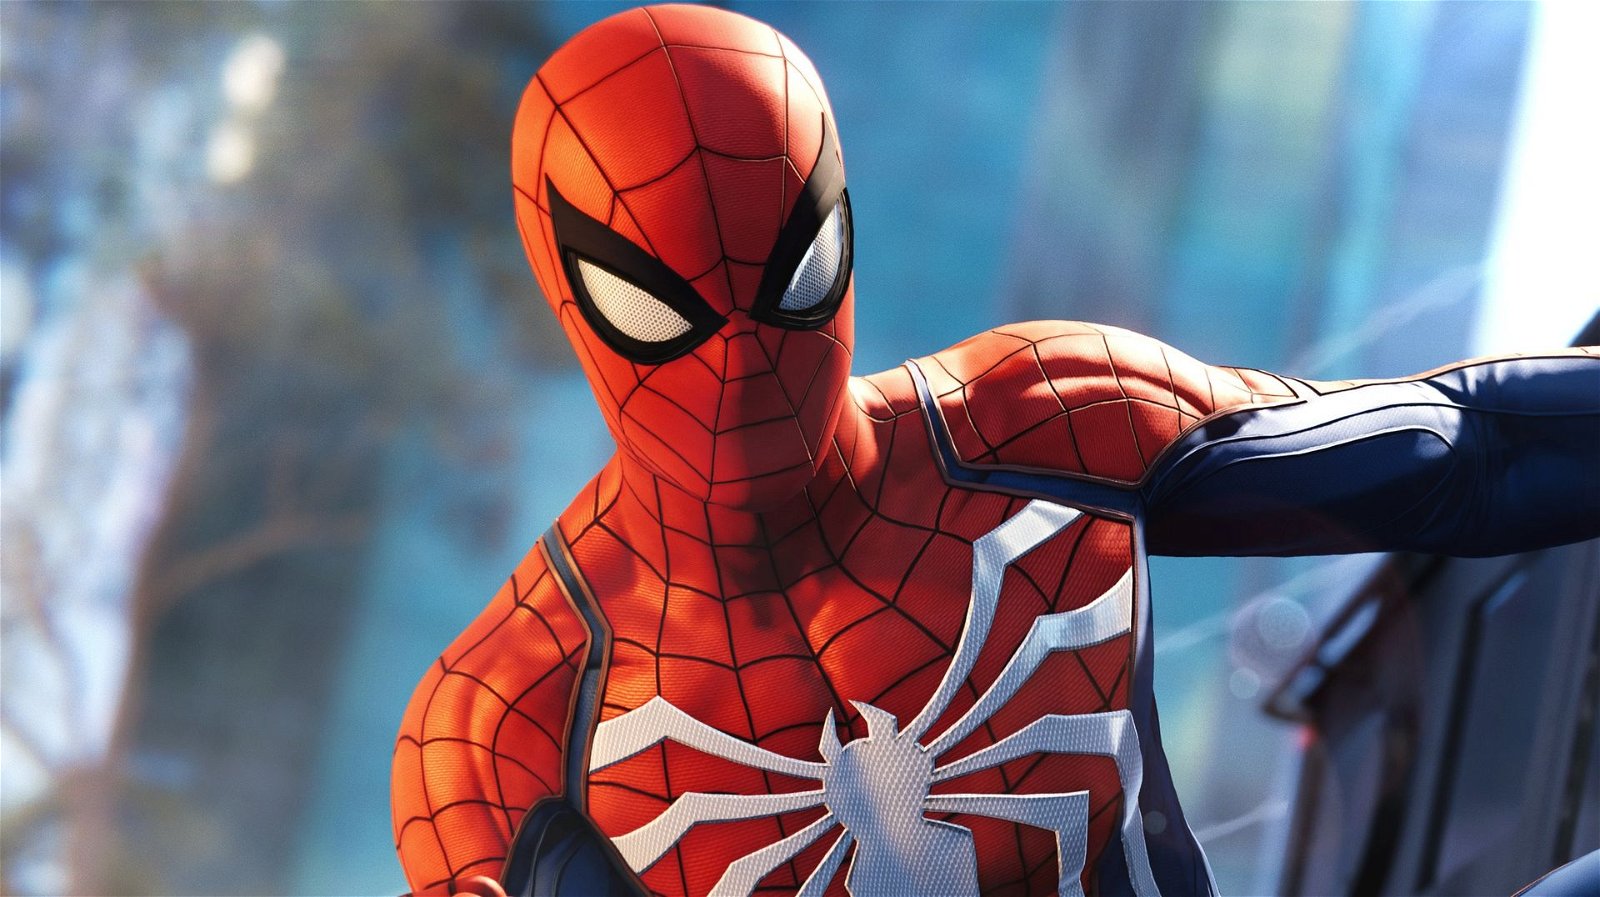 Marvel's Spider-Man "No Plans to Release Physically" 2